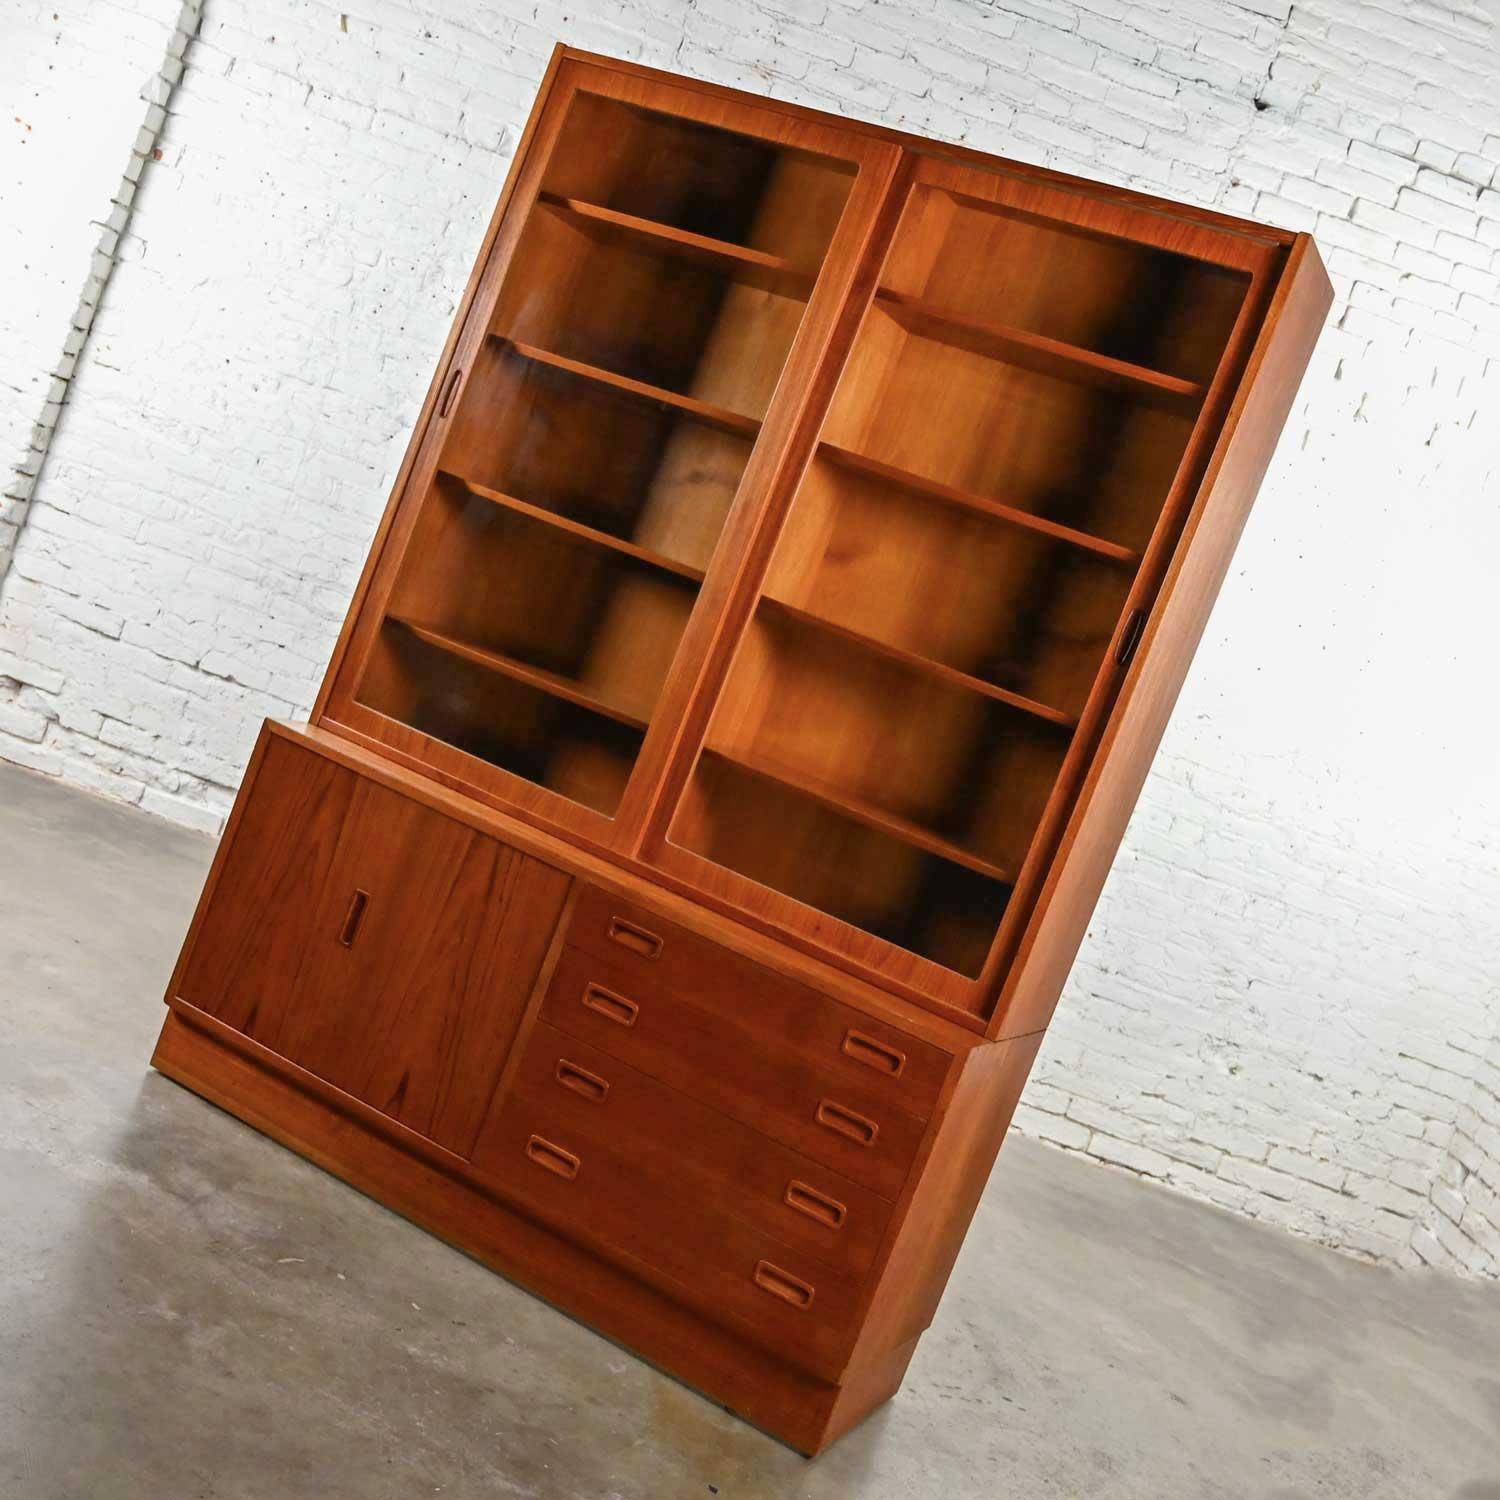 Lovely Poul Hundevad for Hundevad & Co. Scandinavian Modern teak china hutch cabinet, display cabinet, or bookcase. Comprised of 2 pieces, a top hutch featuring bypass doors with glass inserts and four adjustable shelves and a bottom buffet with 4